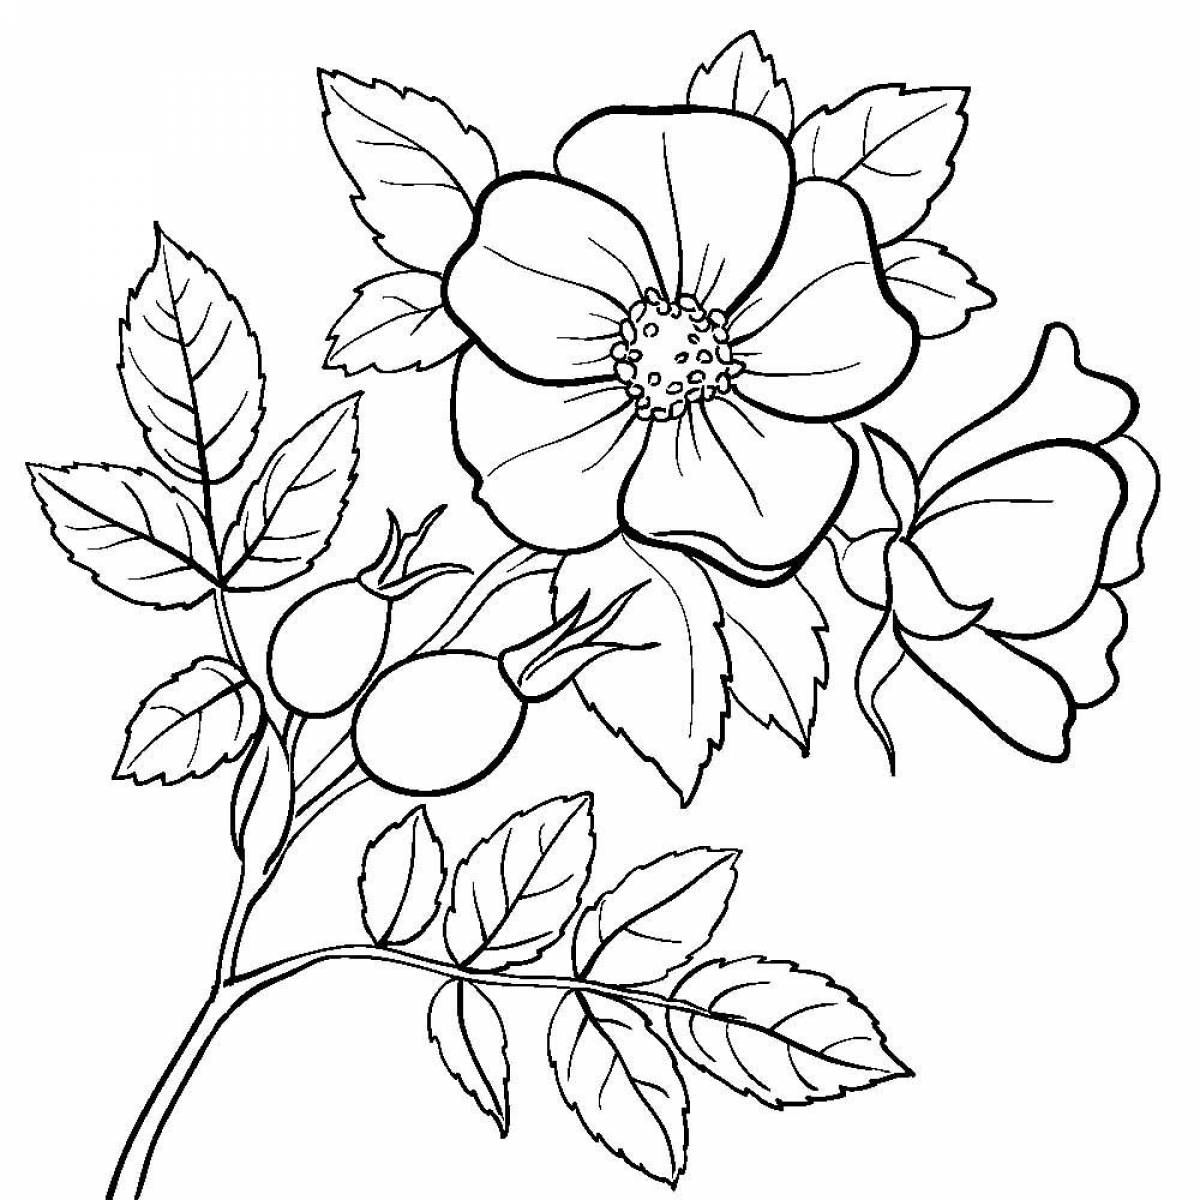 Rosehip coloring page